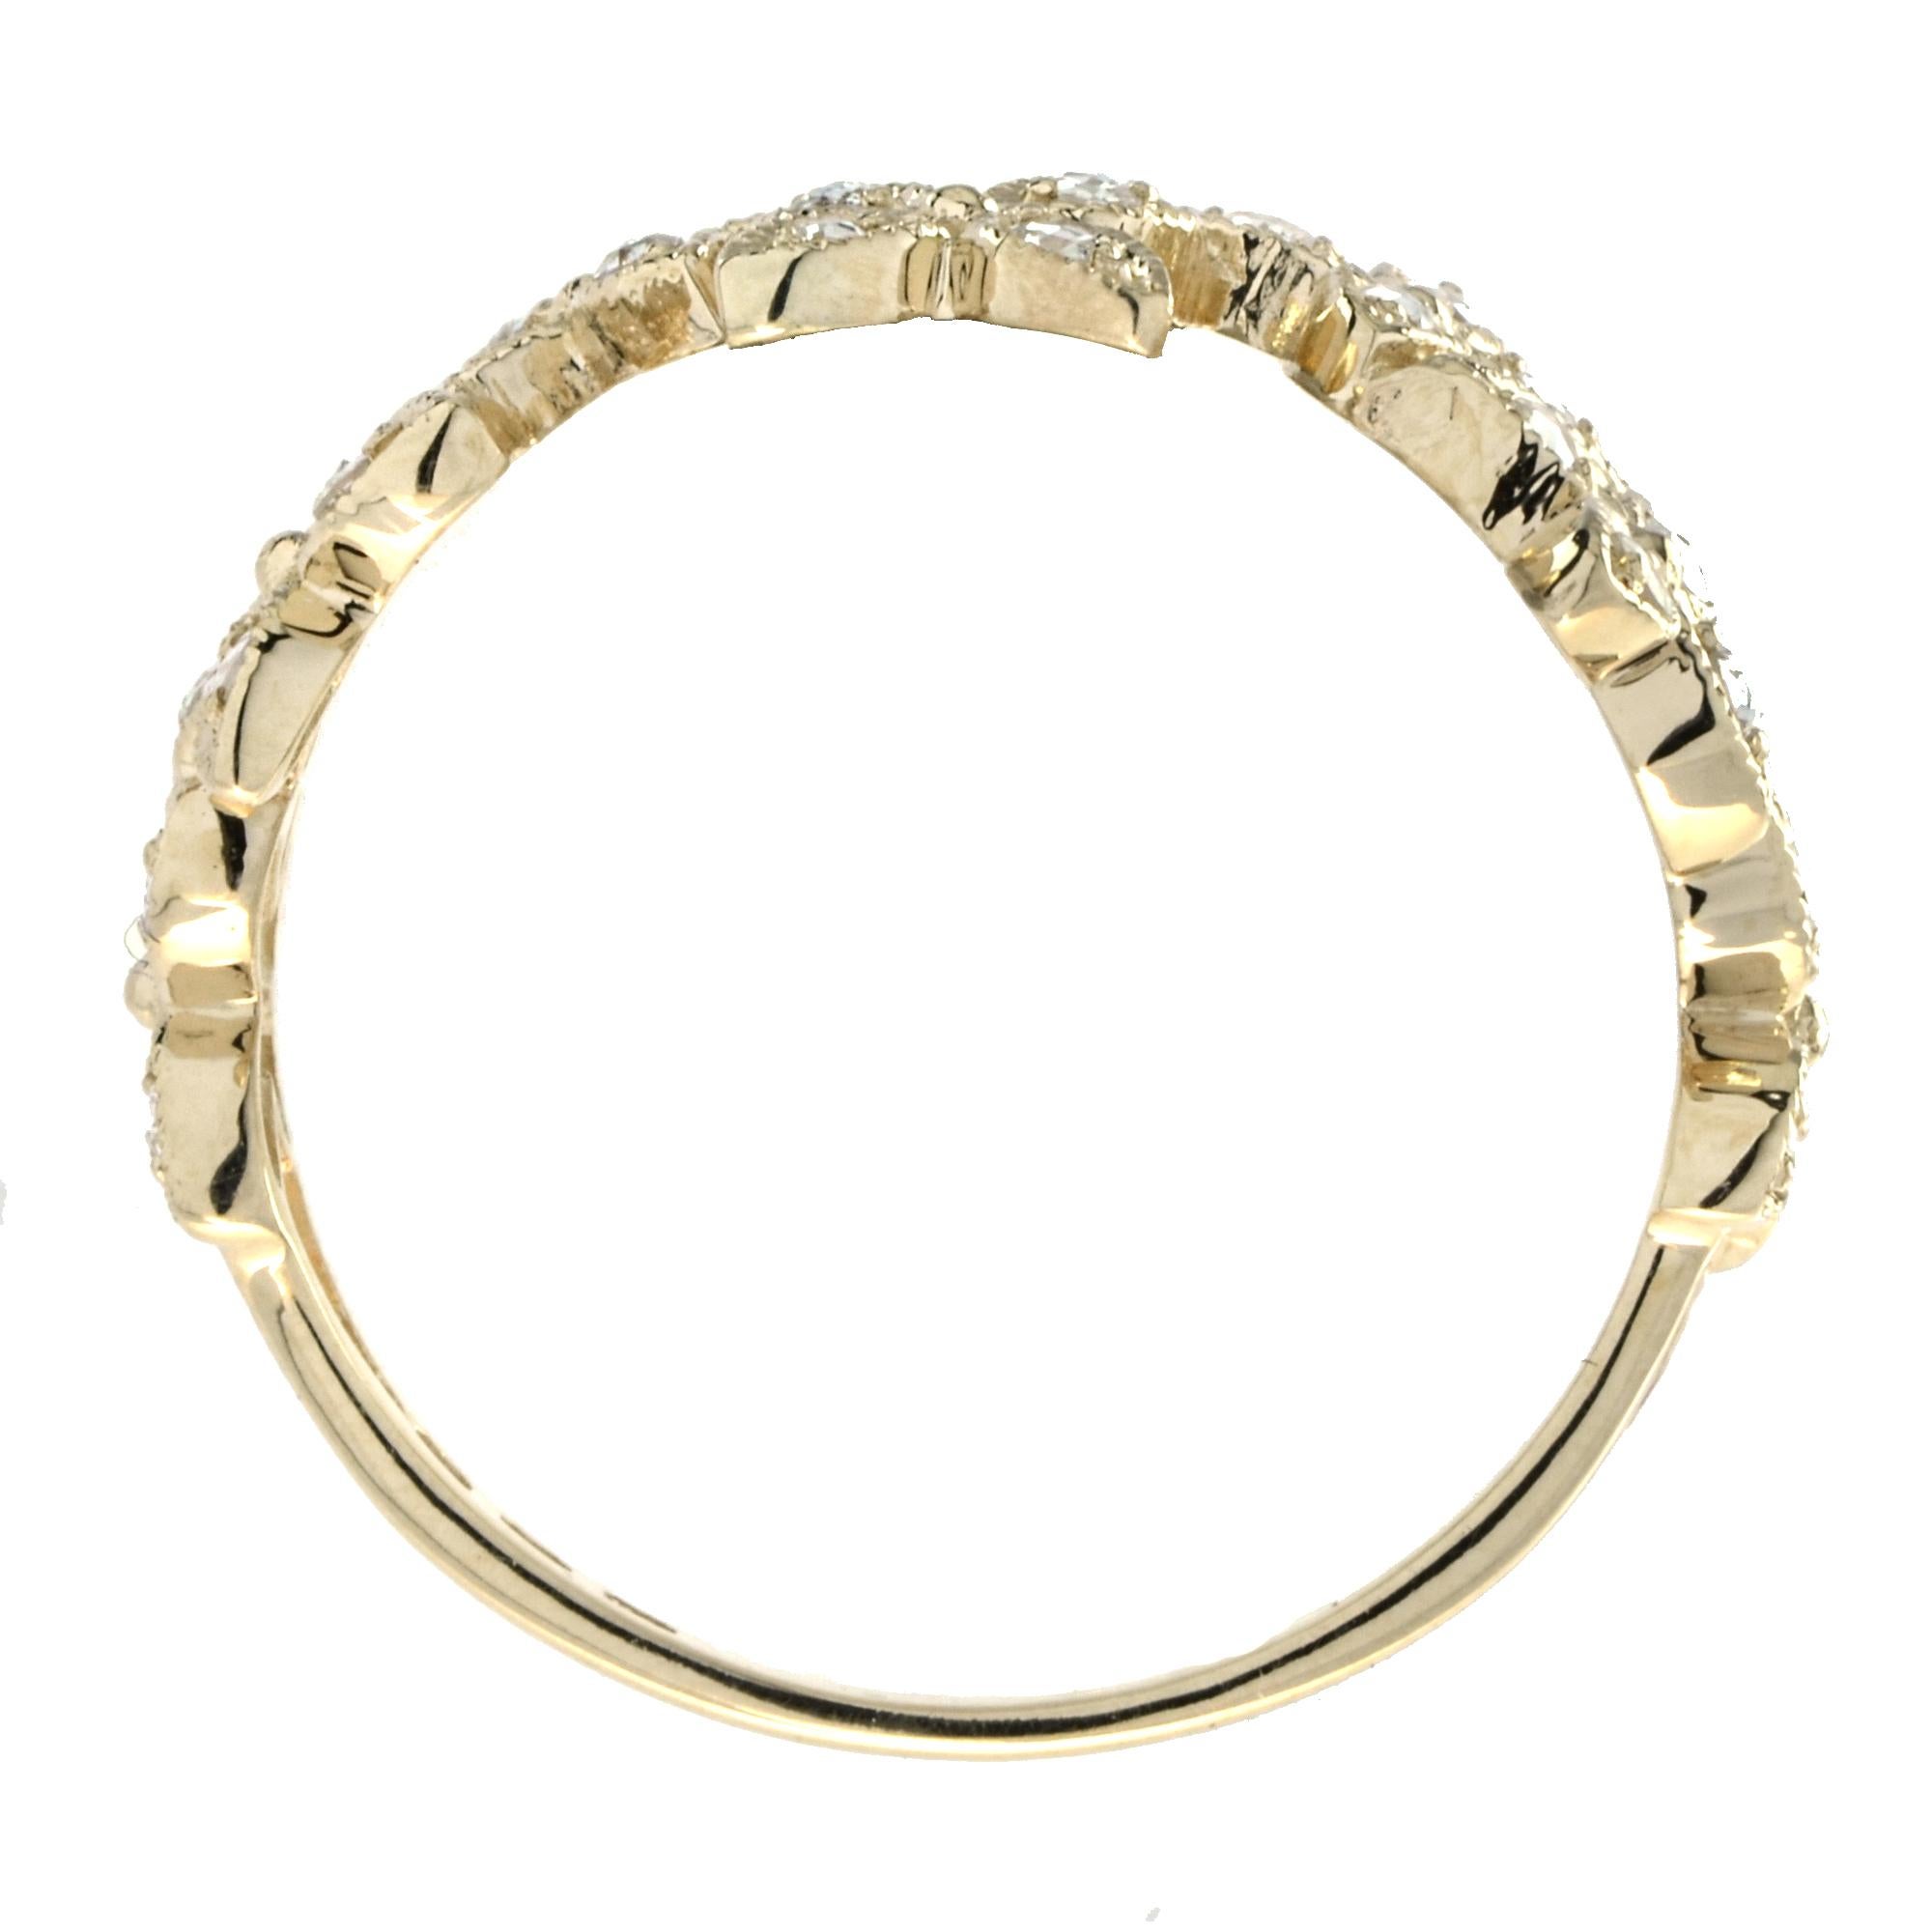 For Sale:  Vintage Style Diamond Half Eternity Flower Ring in 14K Yellow Gold 6